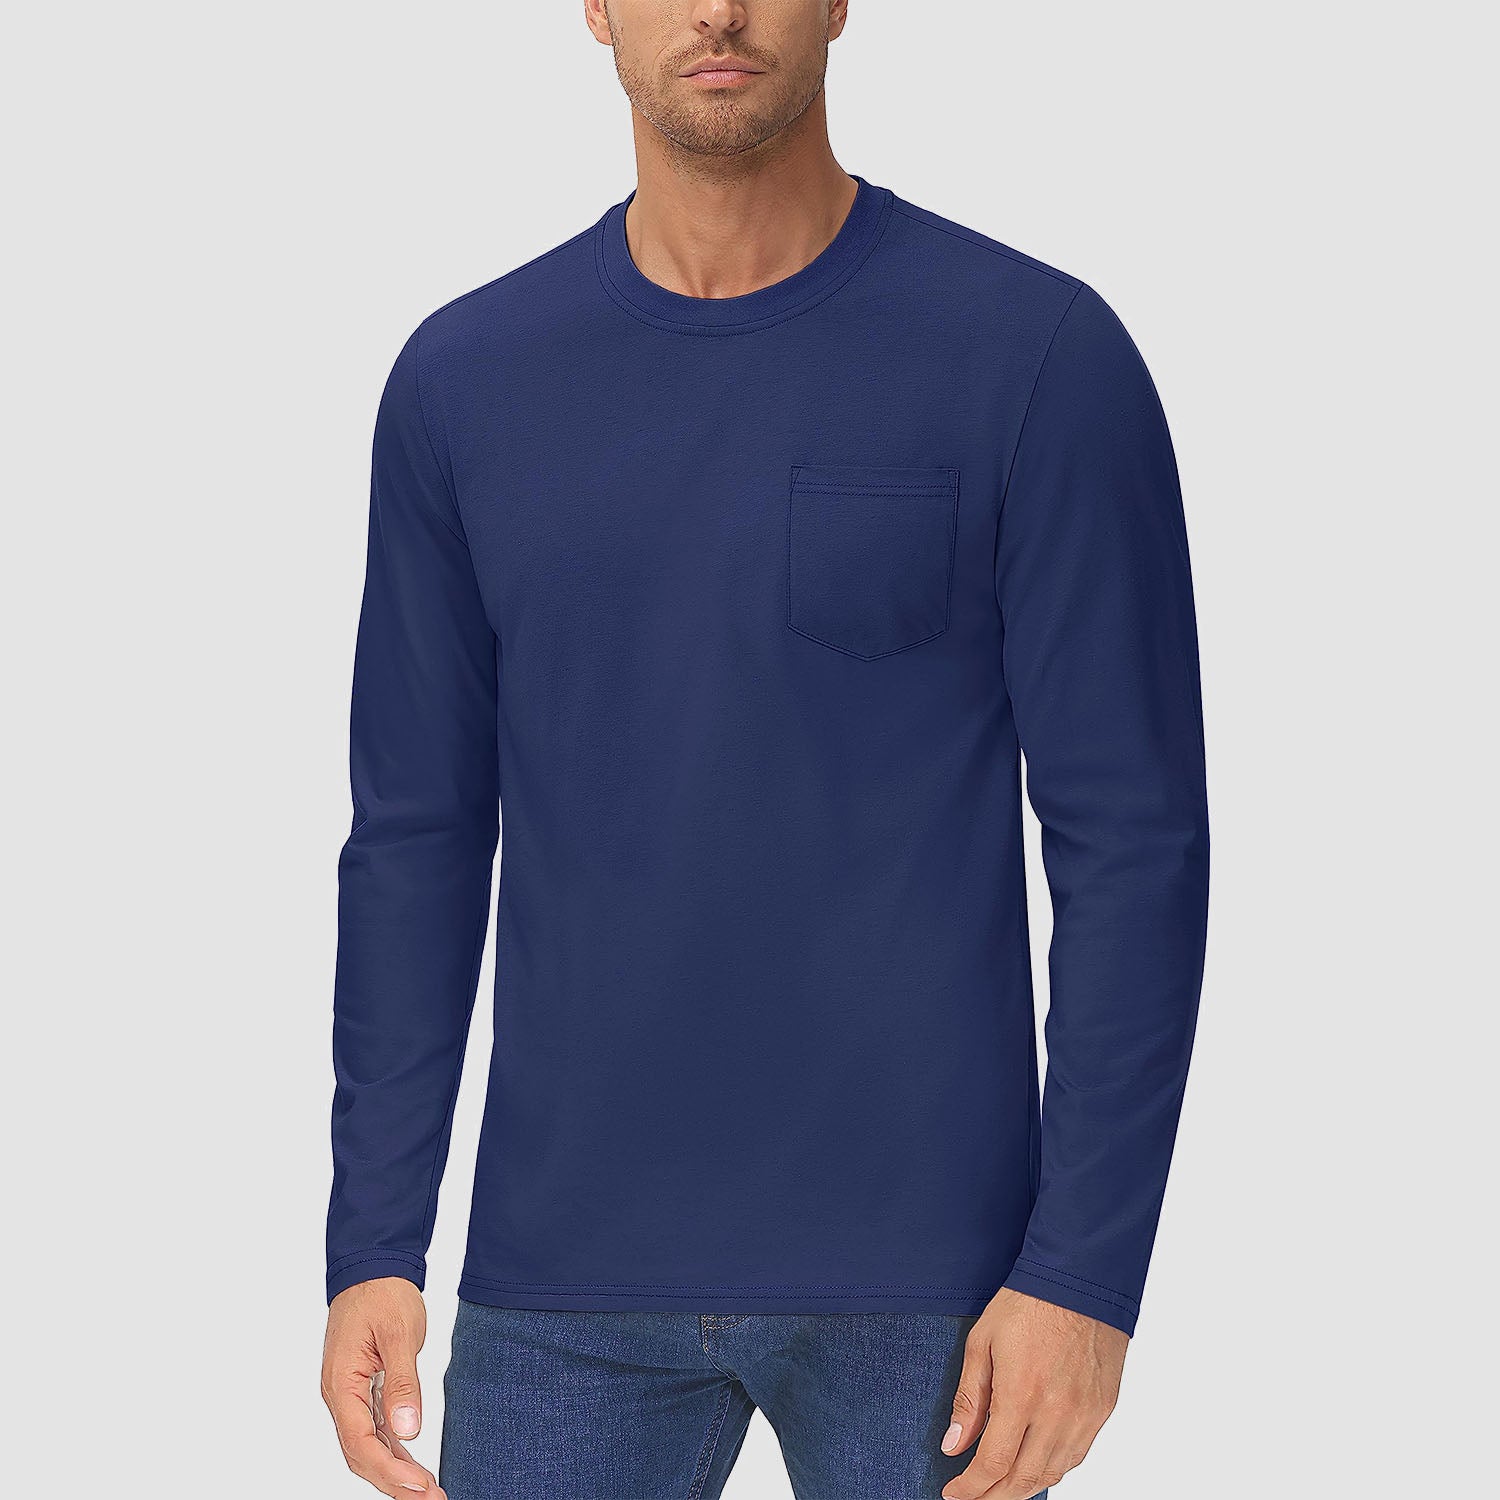 Men's Long Sleeve Shirts with Pocket Cotton Crew Neck Shirts Casual Lightweight T-Shirts